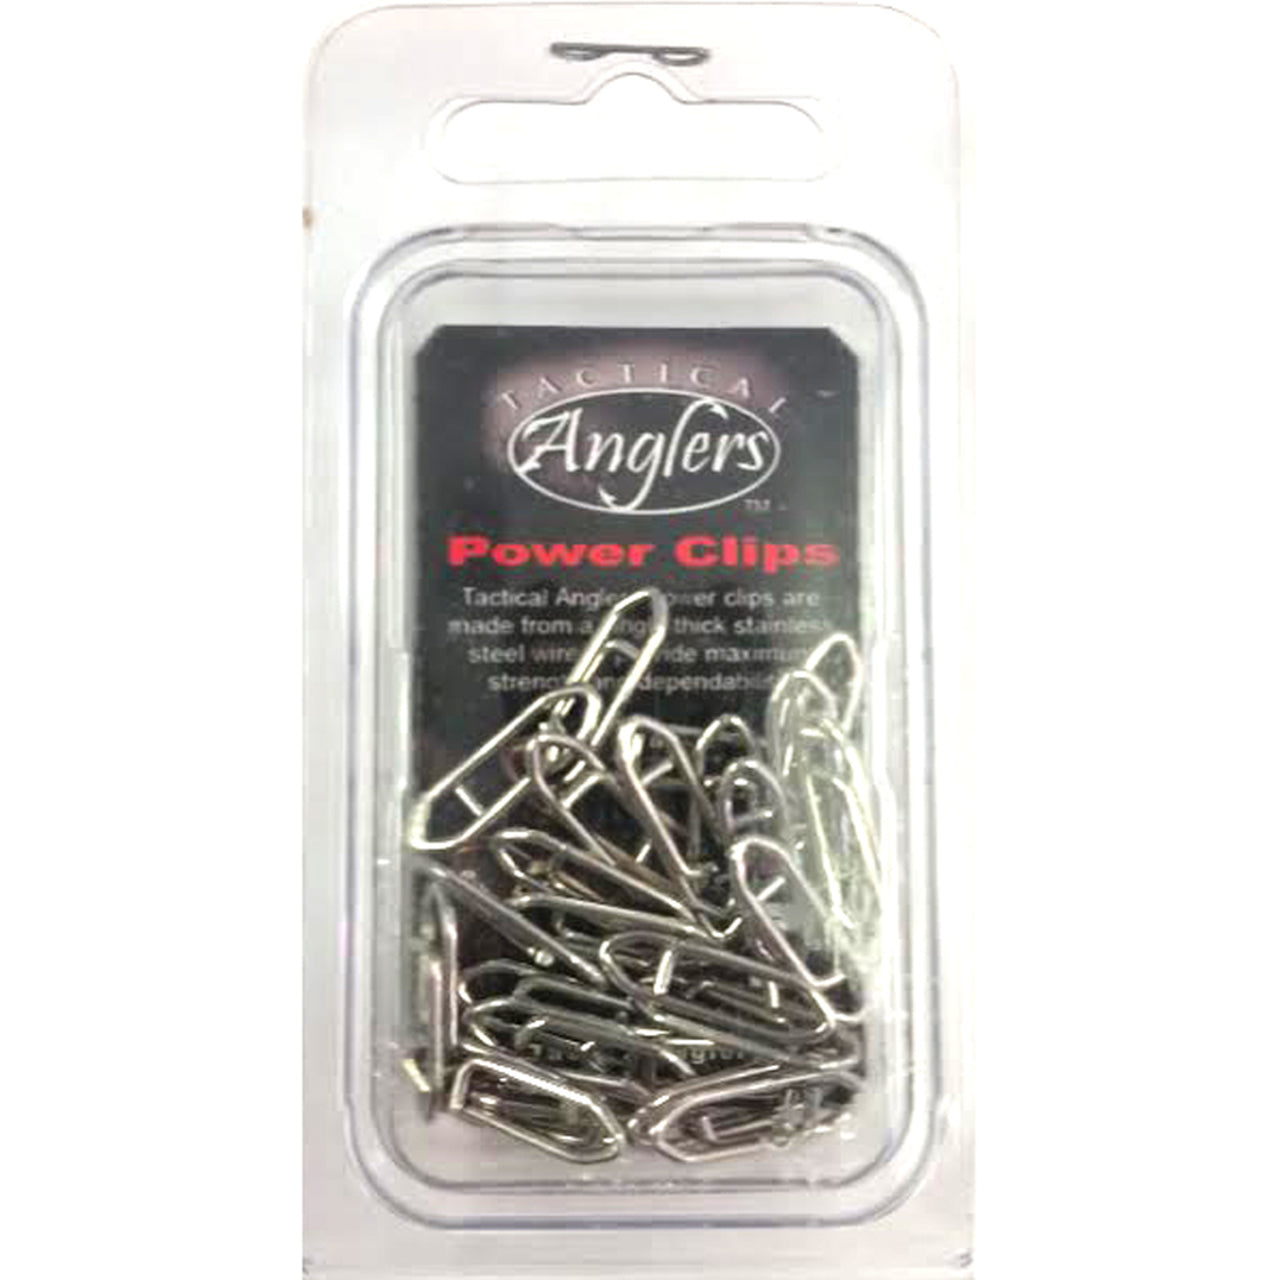 Tactical Angler Clips  EASY LURE CHANGE HOW TO 